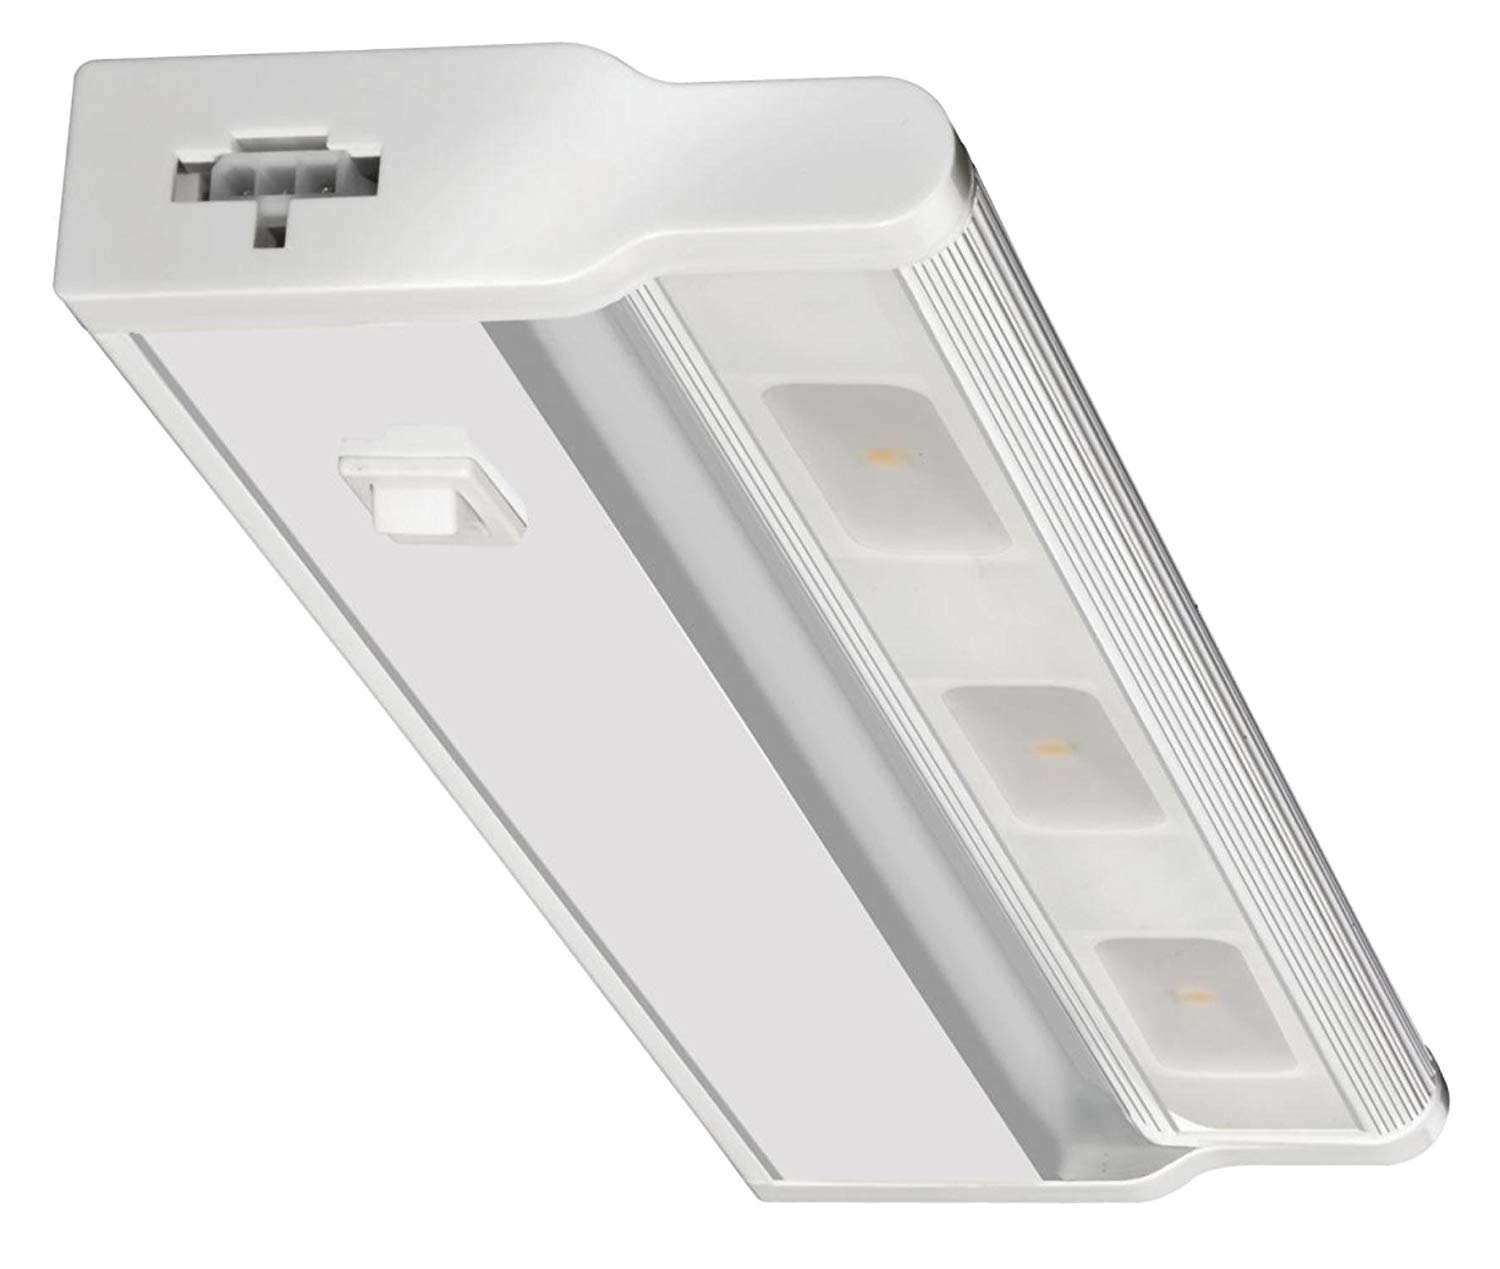 Commercial Electric Under Cabinet Lighting Lithonia Lighting Ucld 12 2700 Wh M4 Led 12 Inch Under Cabinet Light